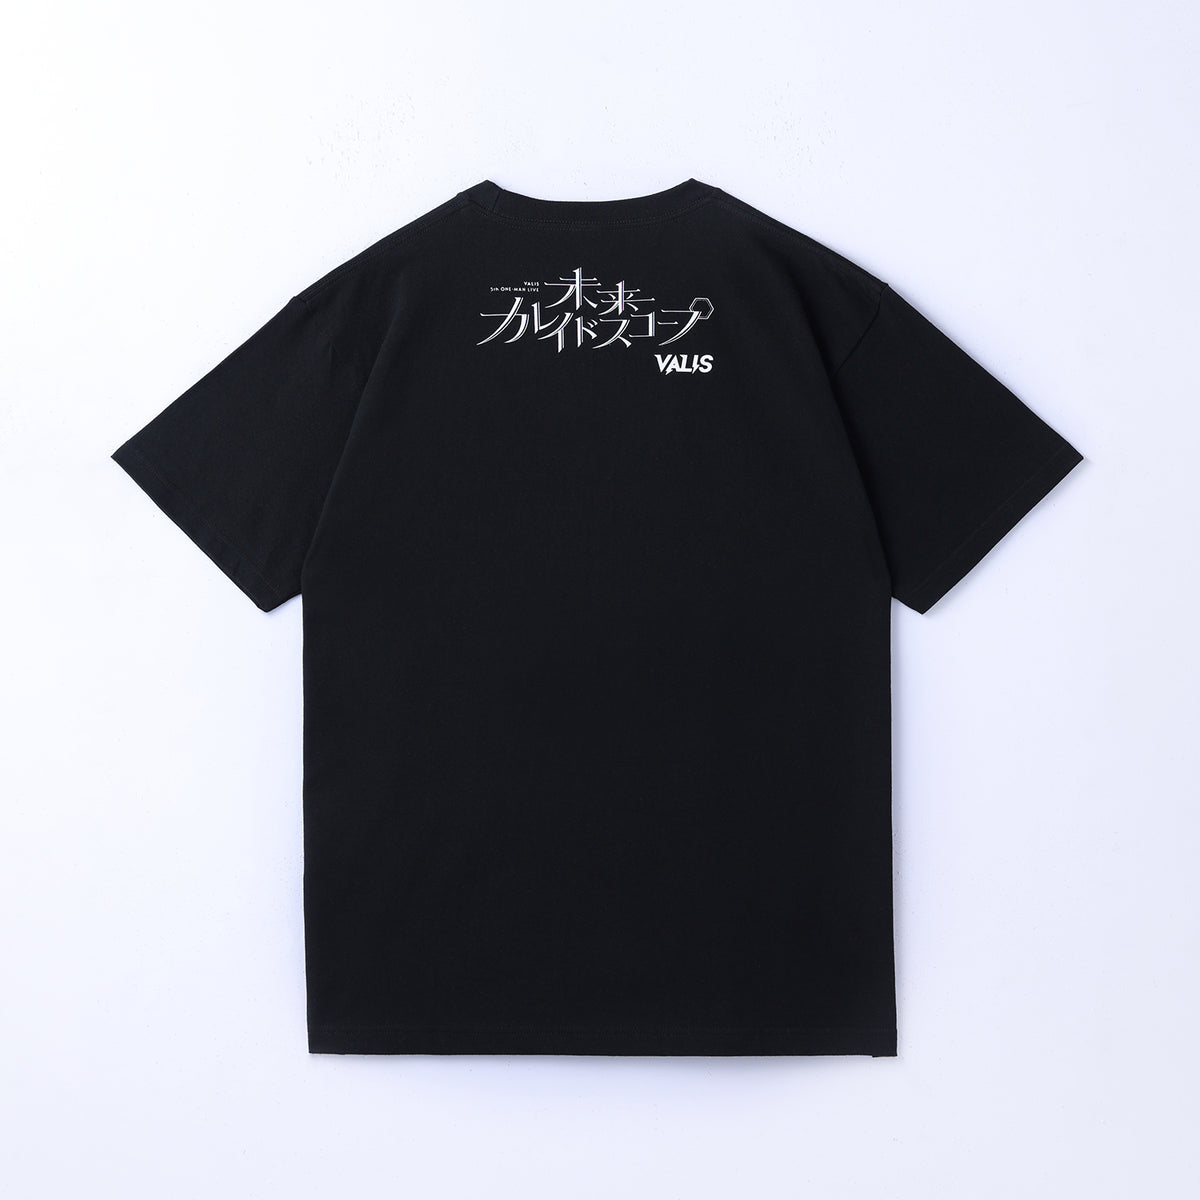 【VALIS】Tシャツ Produced by VITTE／5th ONE-MAN LIVE「未来 